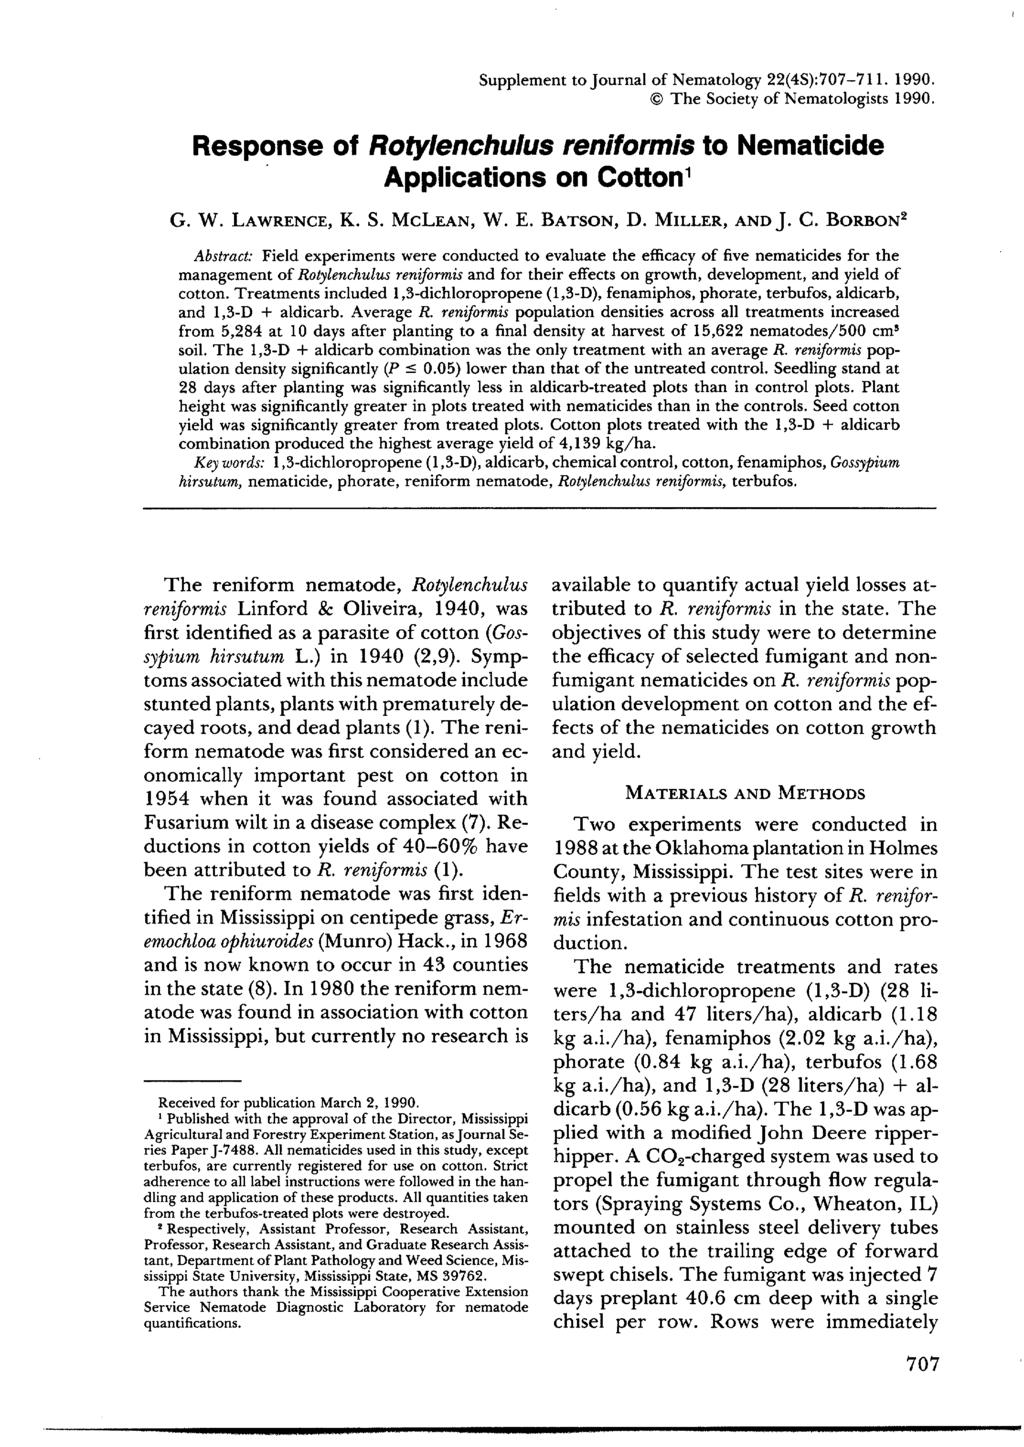 Supplement to Journal of ematology 22(4S):707-711. 1990. The Society of ematologists 1990. Response of Rotylenchulus reniformis to ematicide Applications on Cotton 1 G. W. LAWRECE, K. S. MCLEA, W. E.